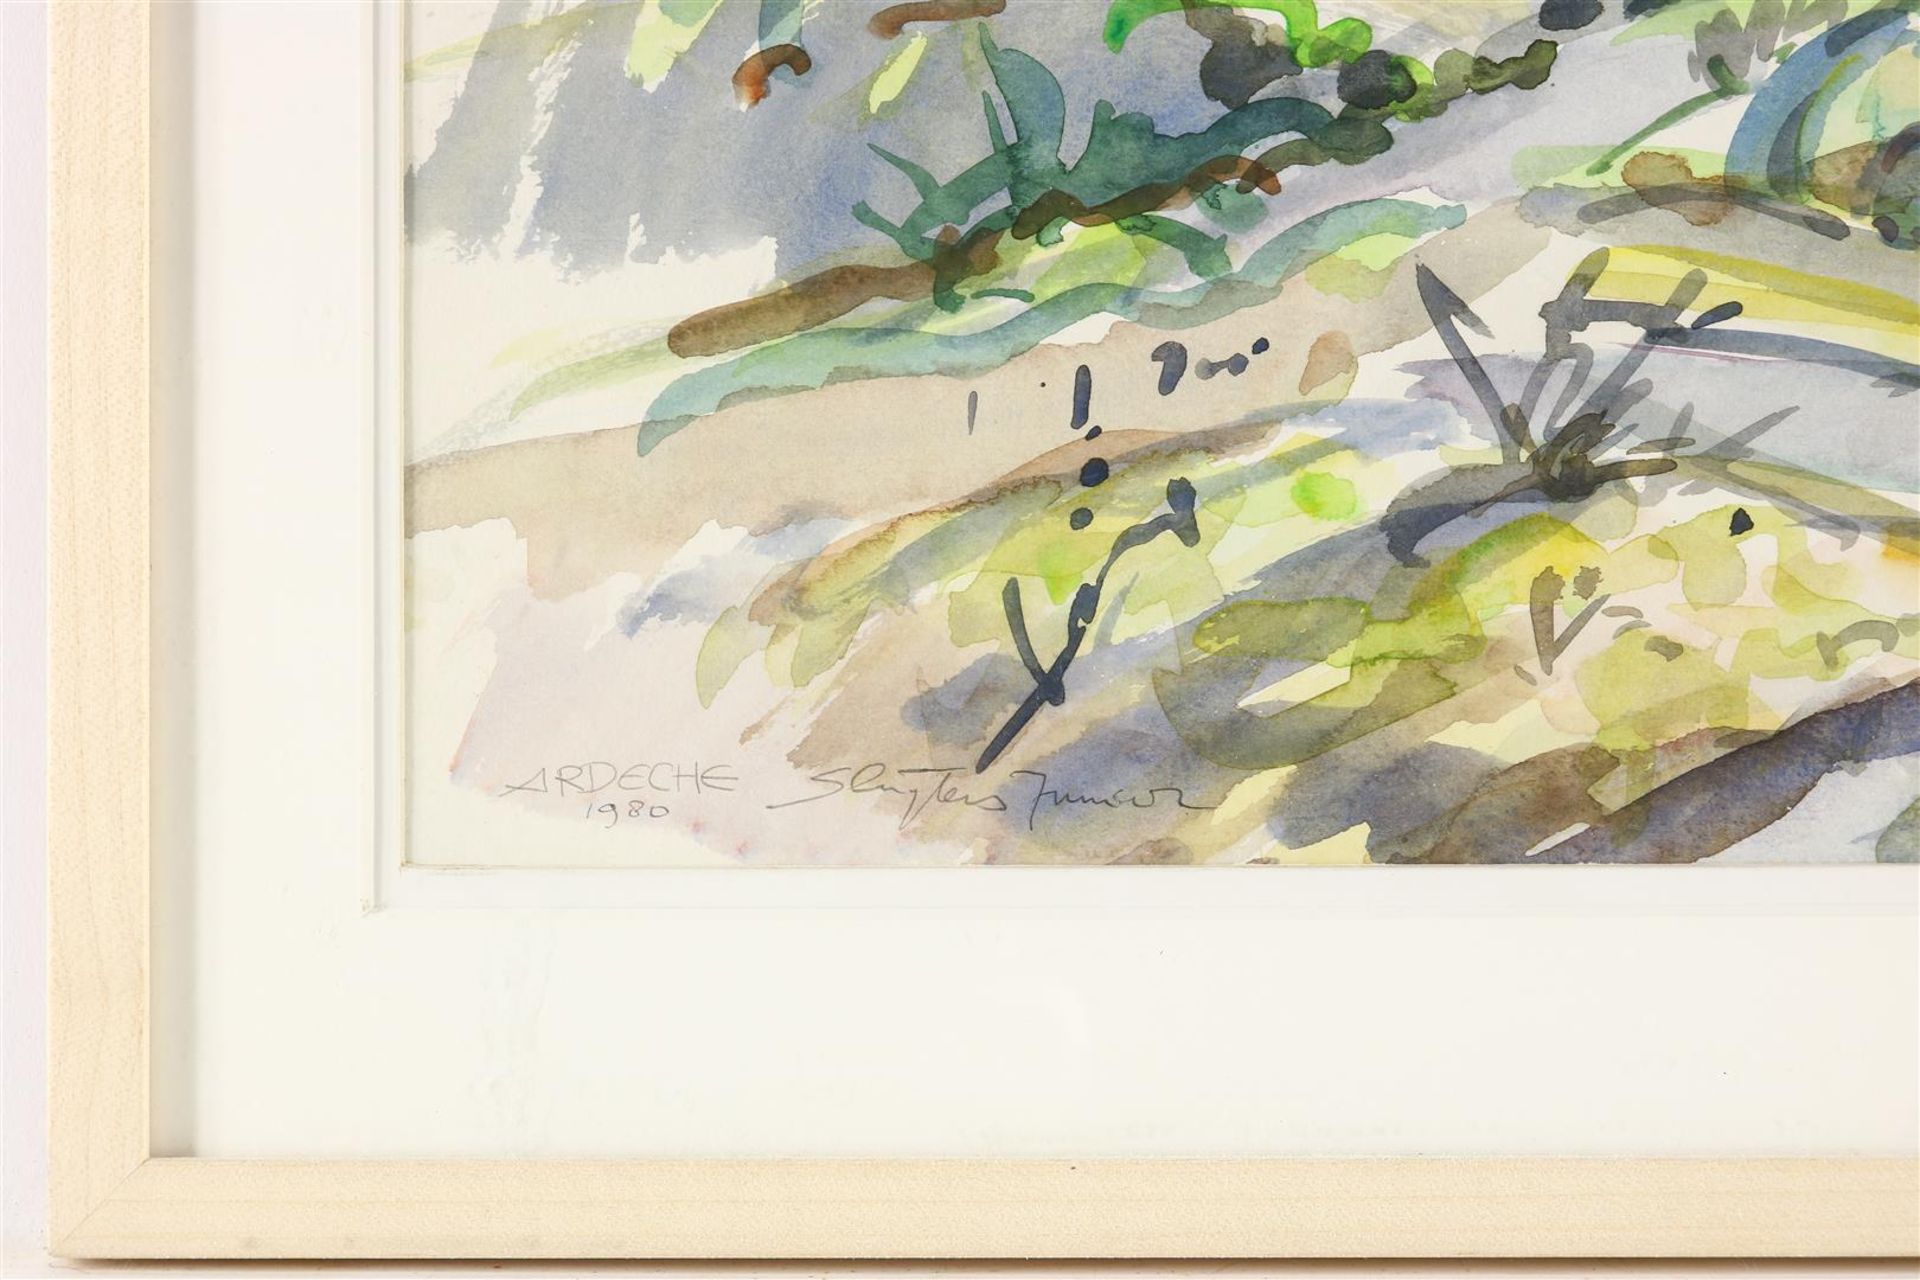 Jan Sluijters jr. (1914-2005) French landscape in Ardeche, signed and dated 1980 lower left. - Image 3 of 4